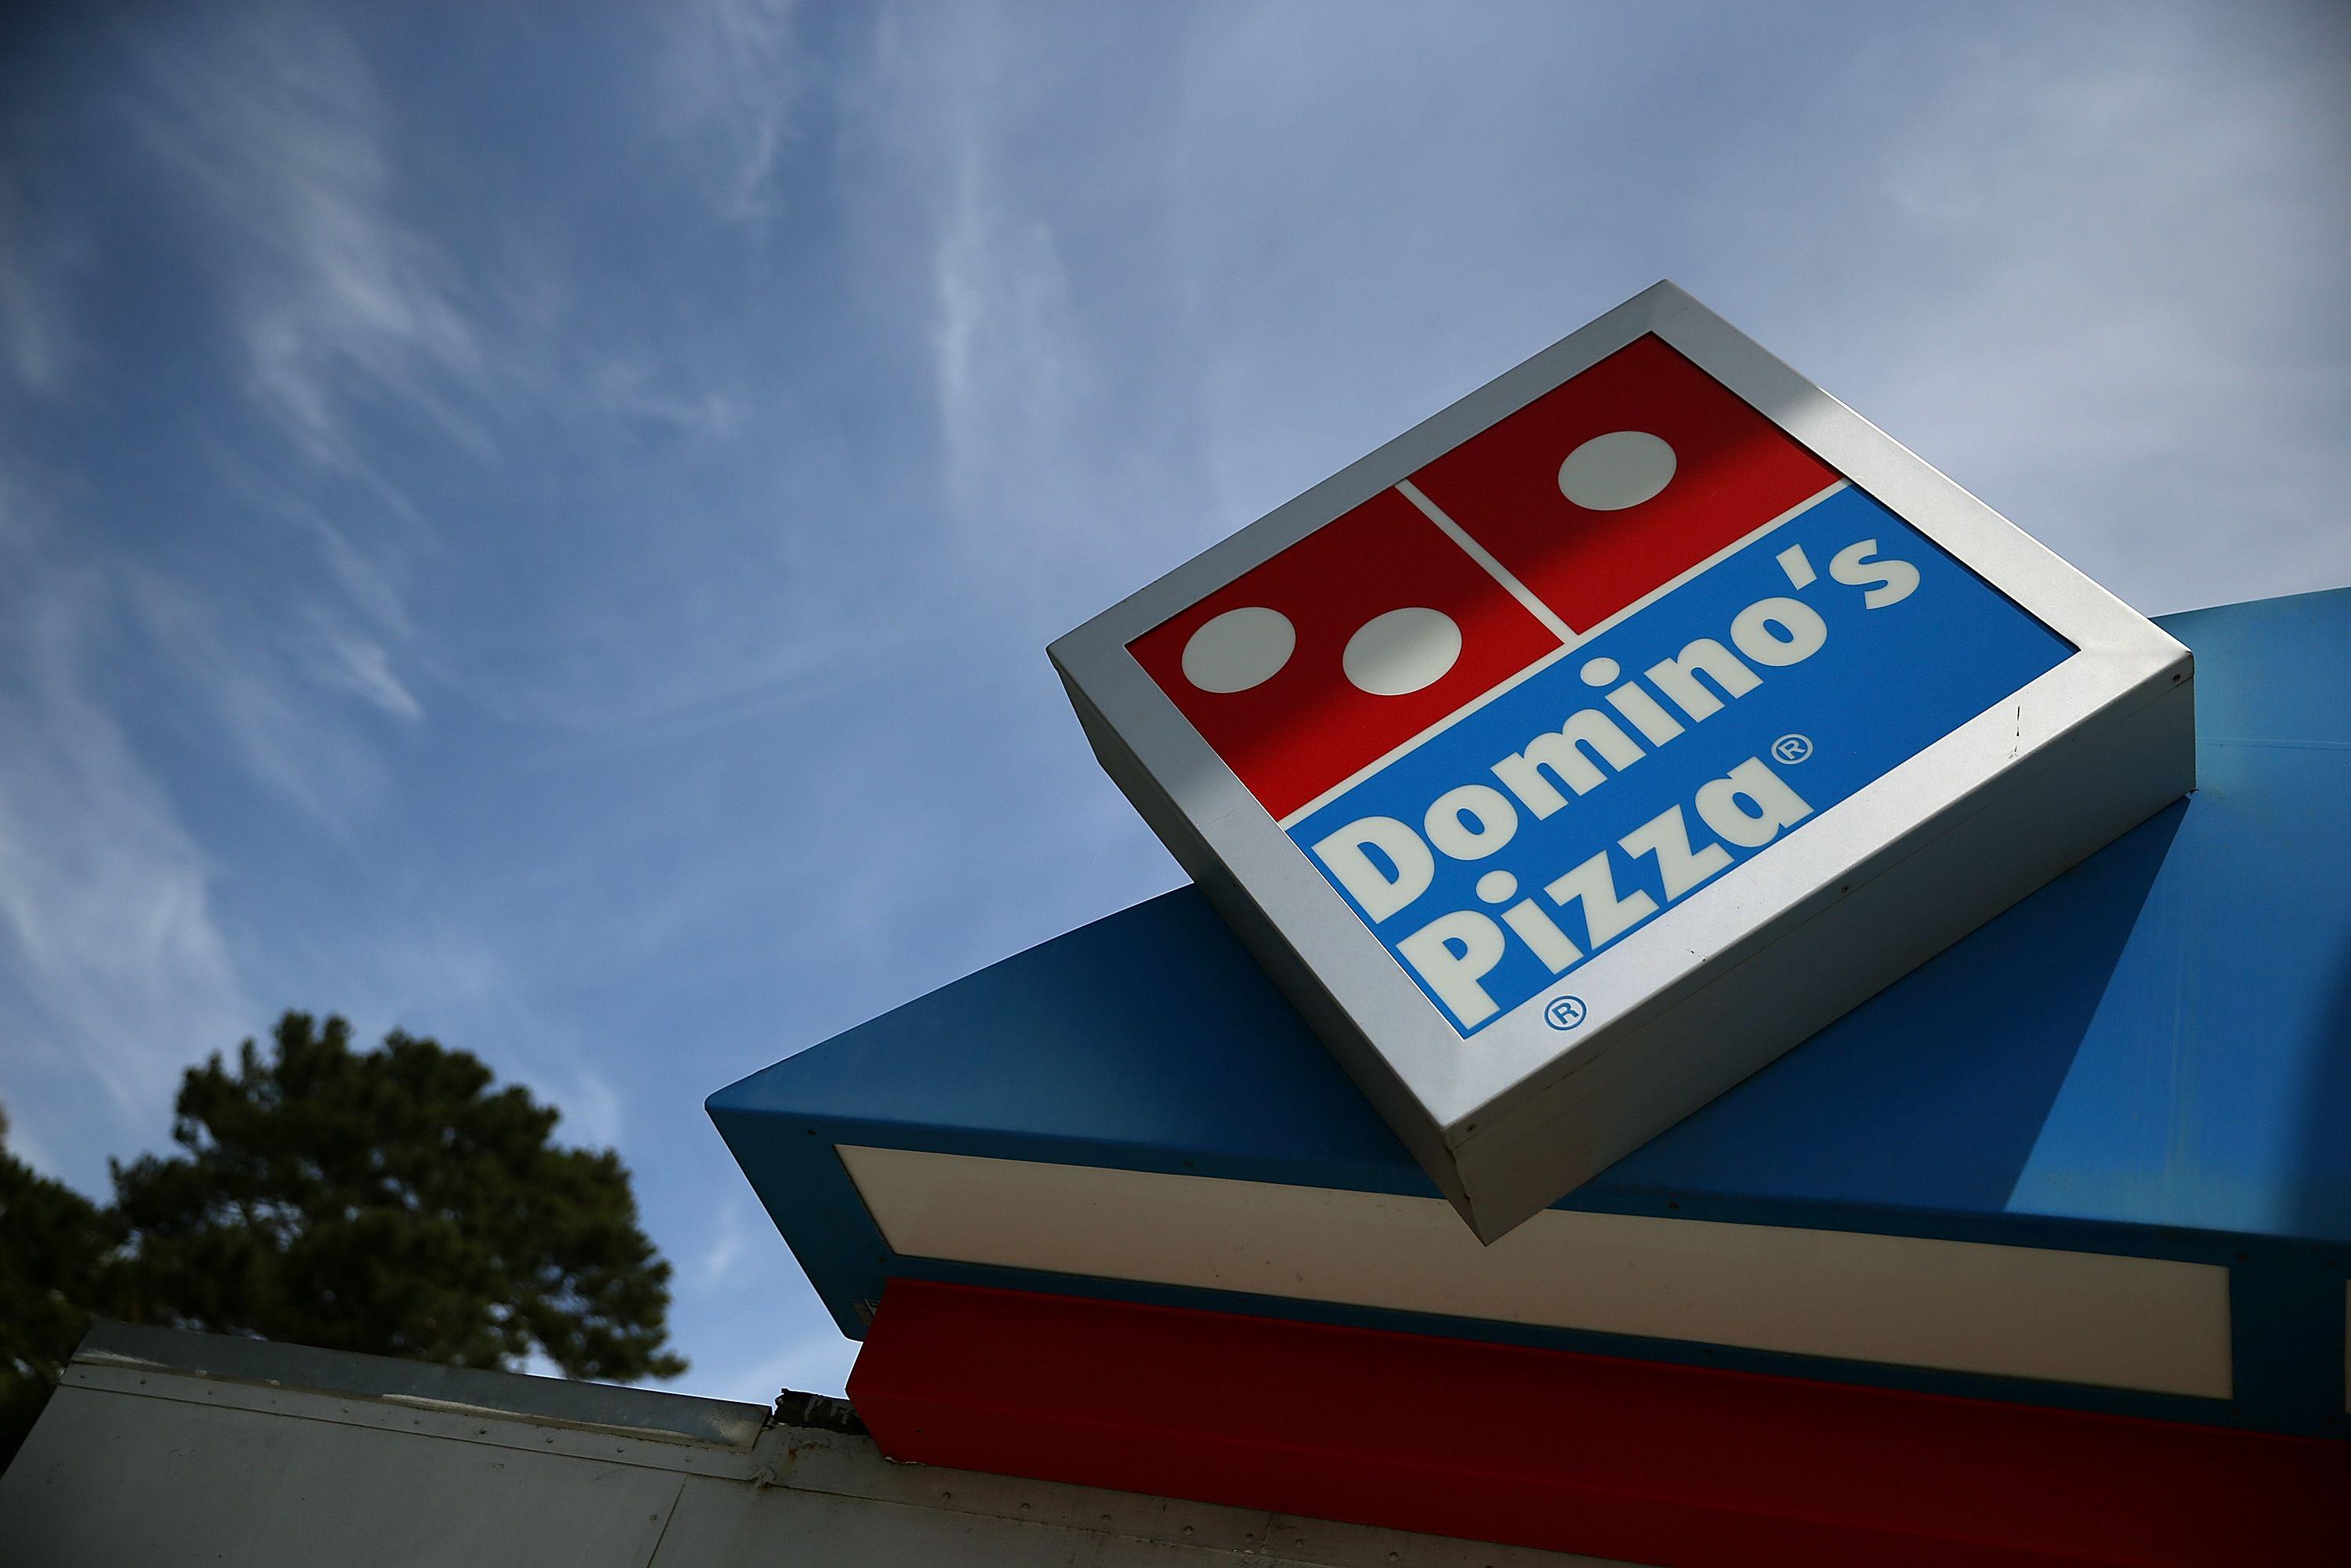 Domino's Logo - Here's Why Domino's Pizza Shares Are on Fire